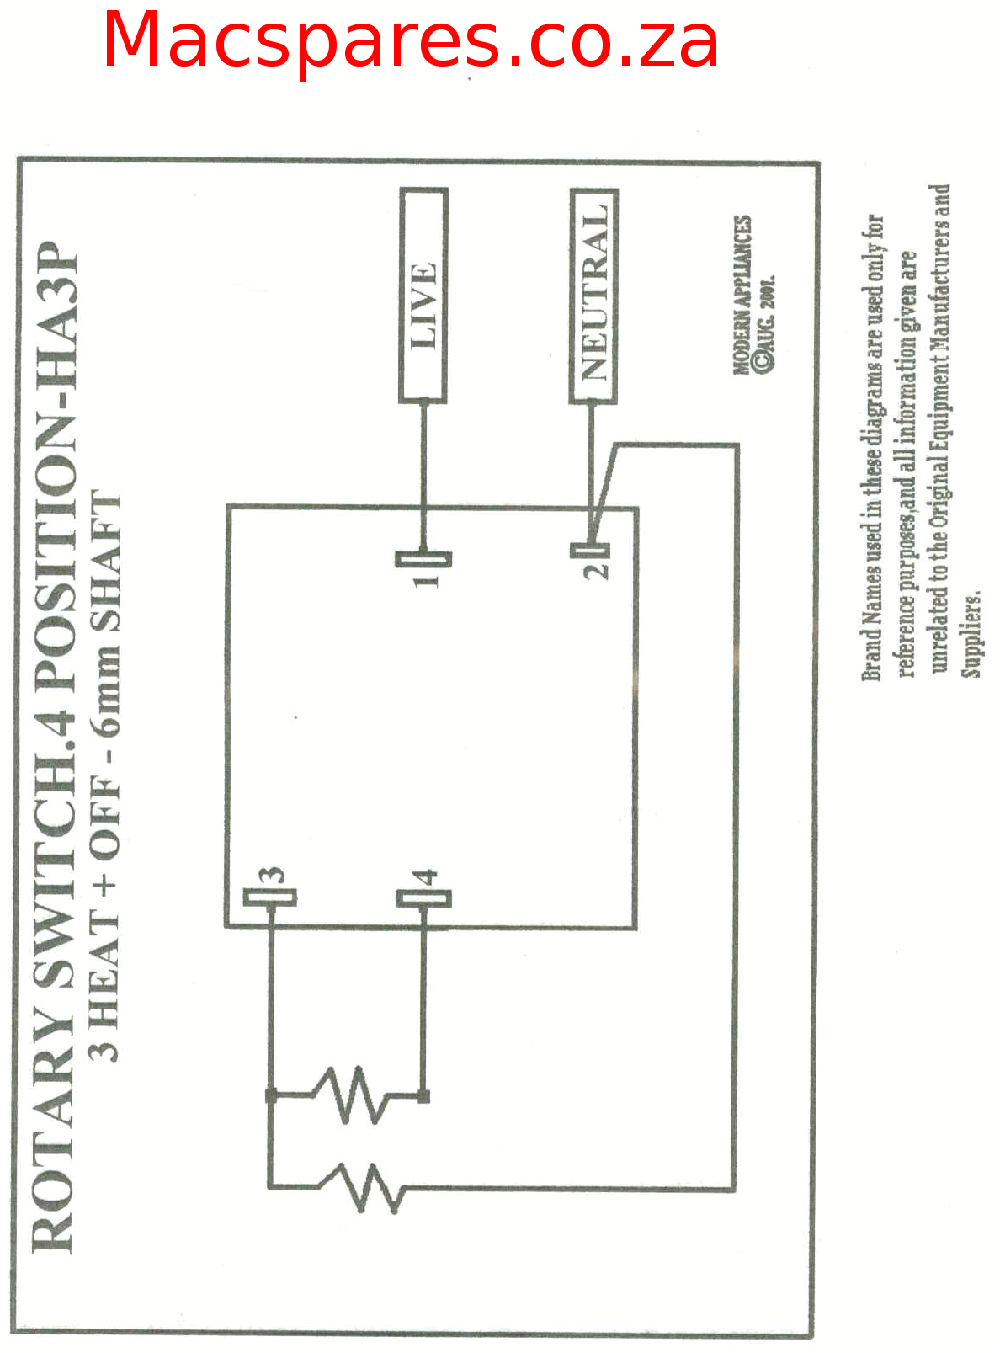 rotary 6 position switch a two plate hotplate connection